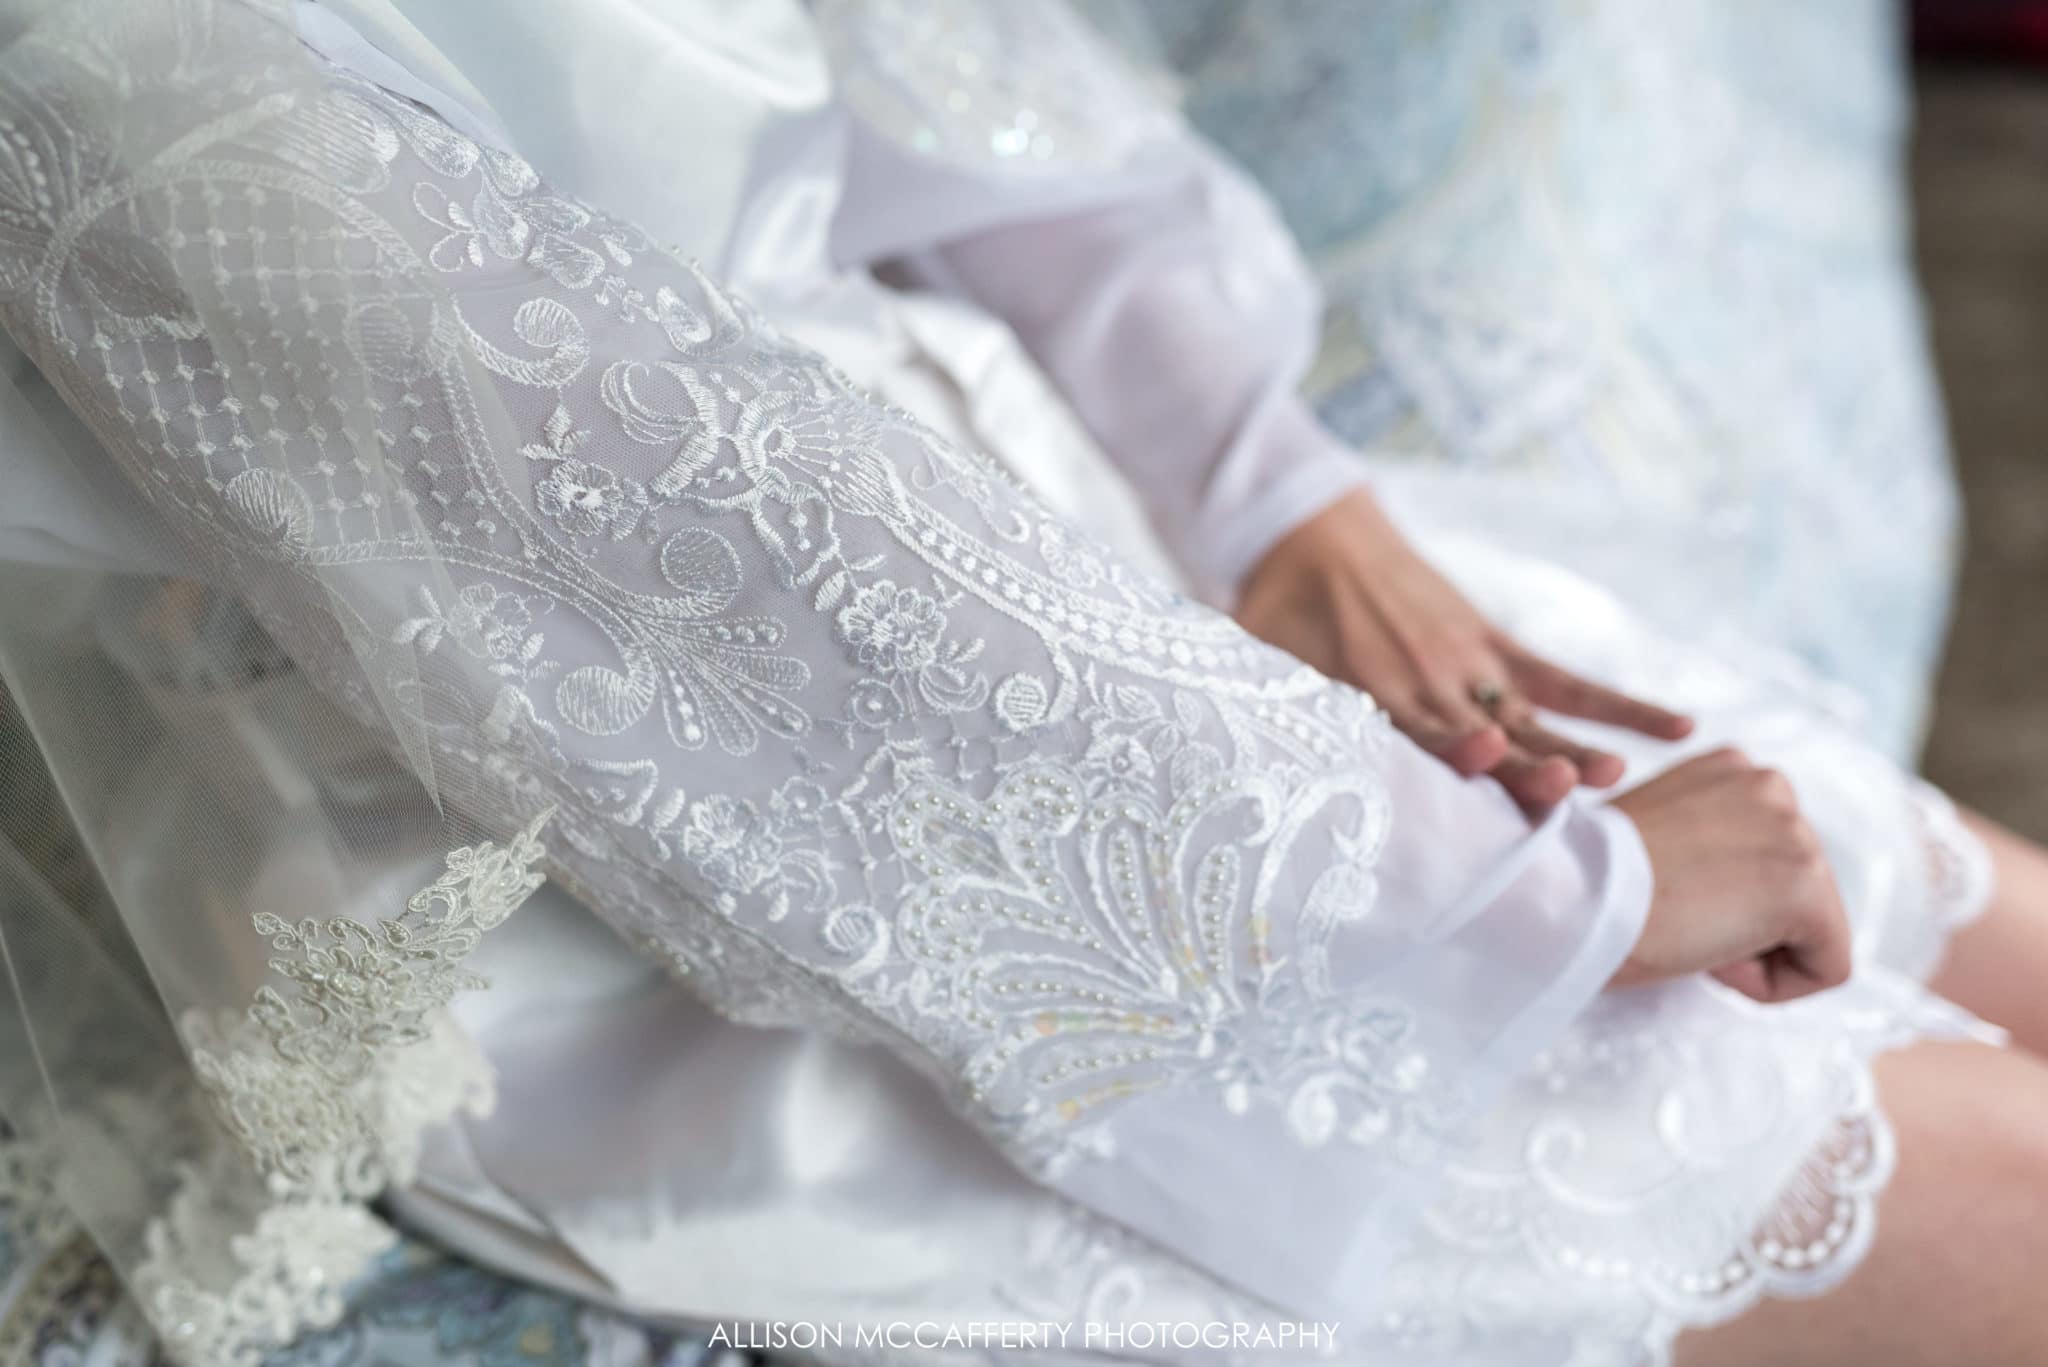 Bridal robe made from mother's wedding dress